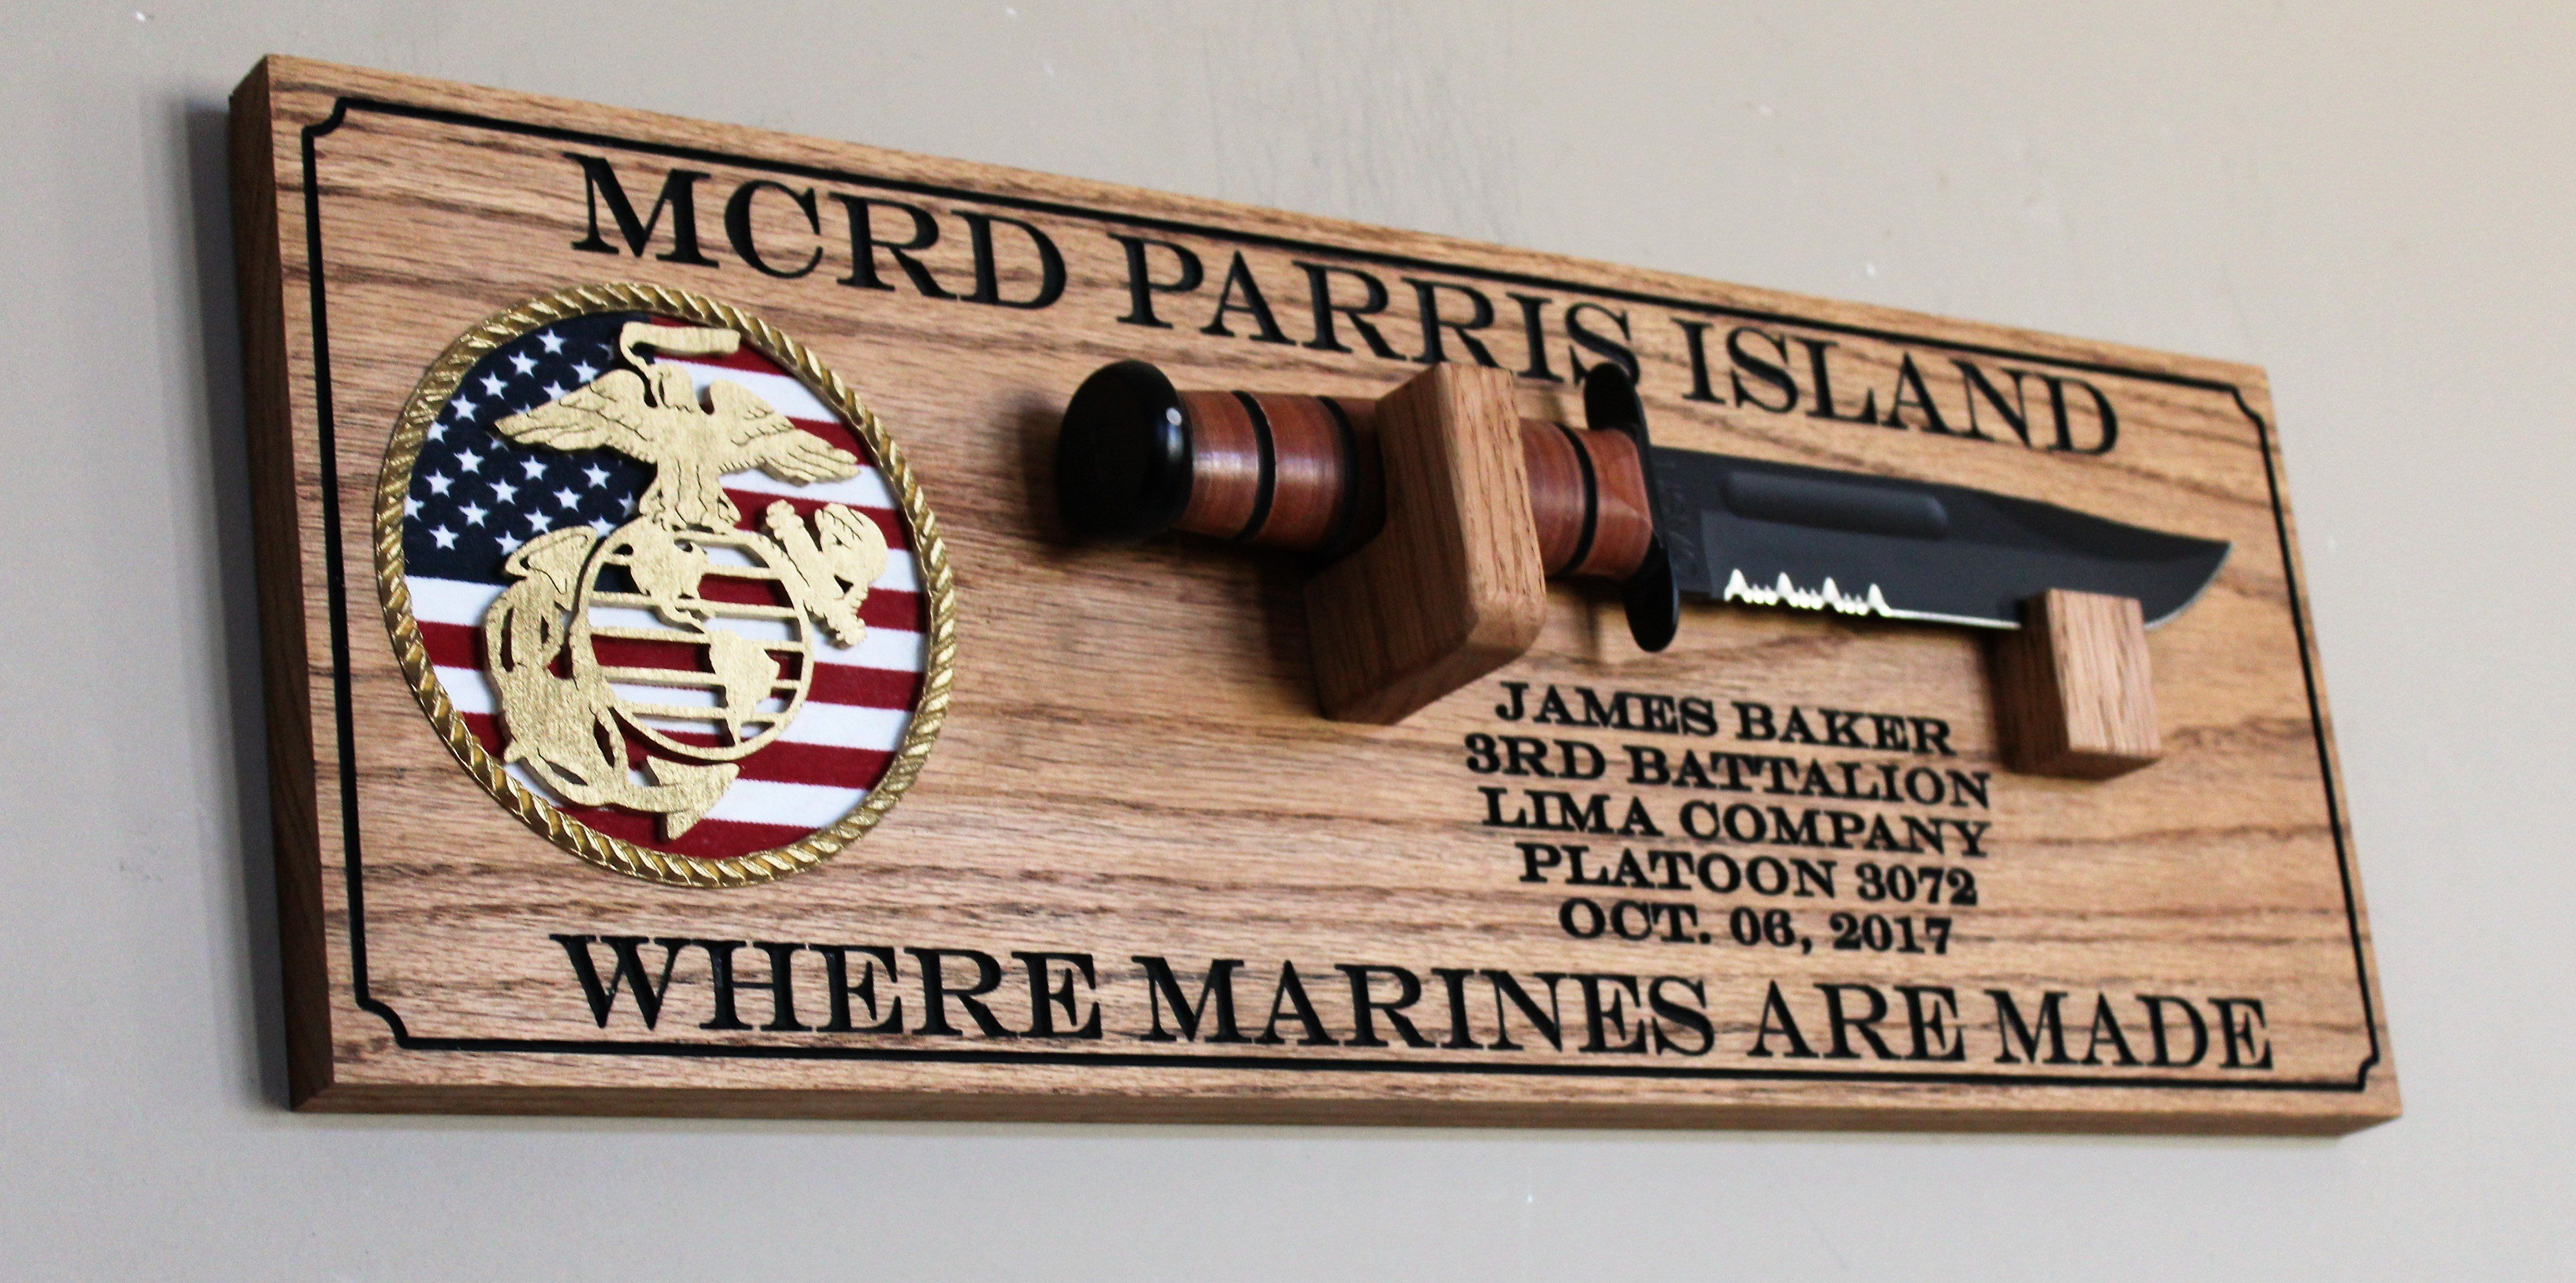 Marine Graduation Gift Ideas
 USMC Wall Mount Display With Flag Background Boot Camp